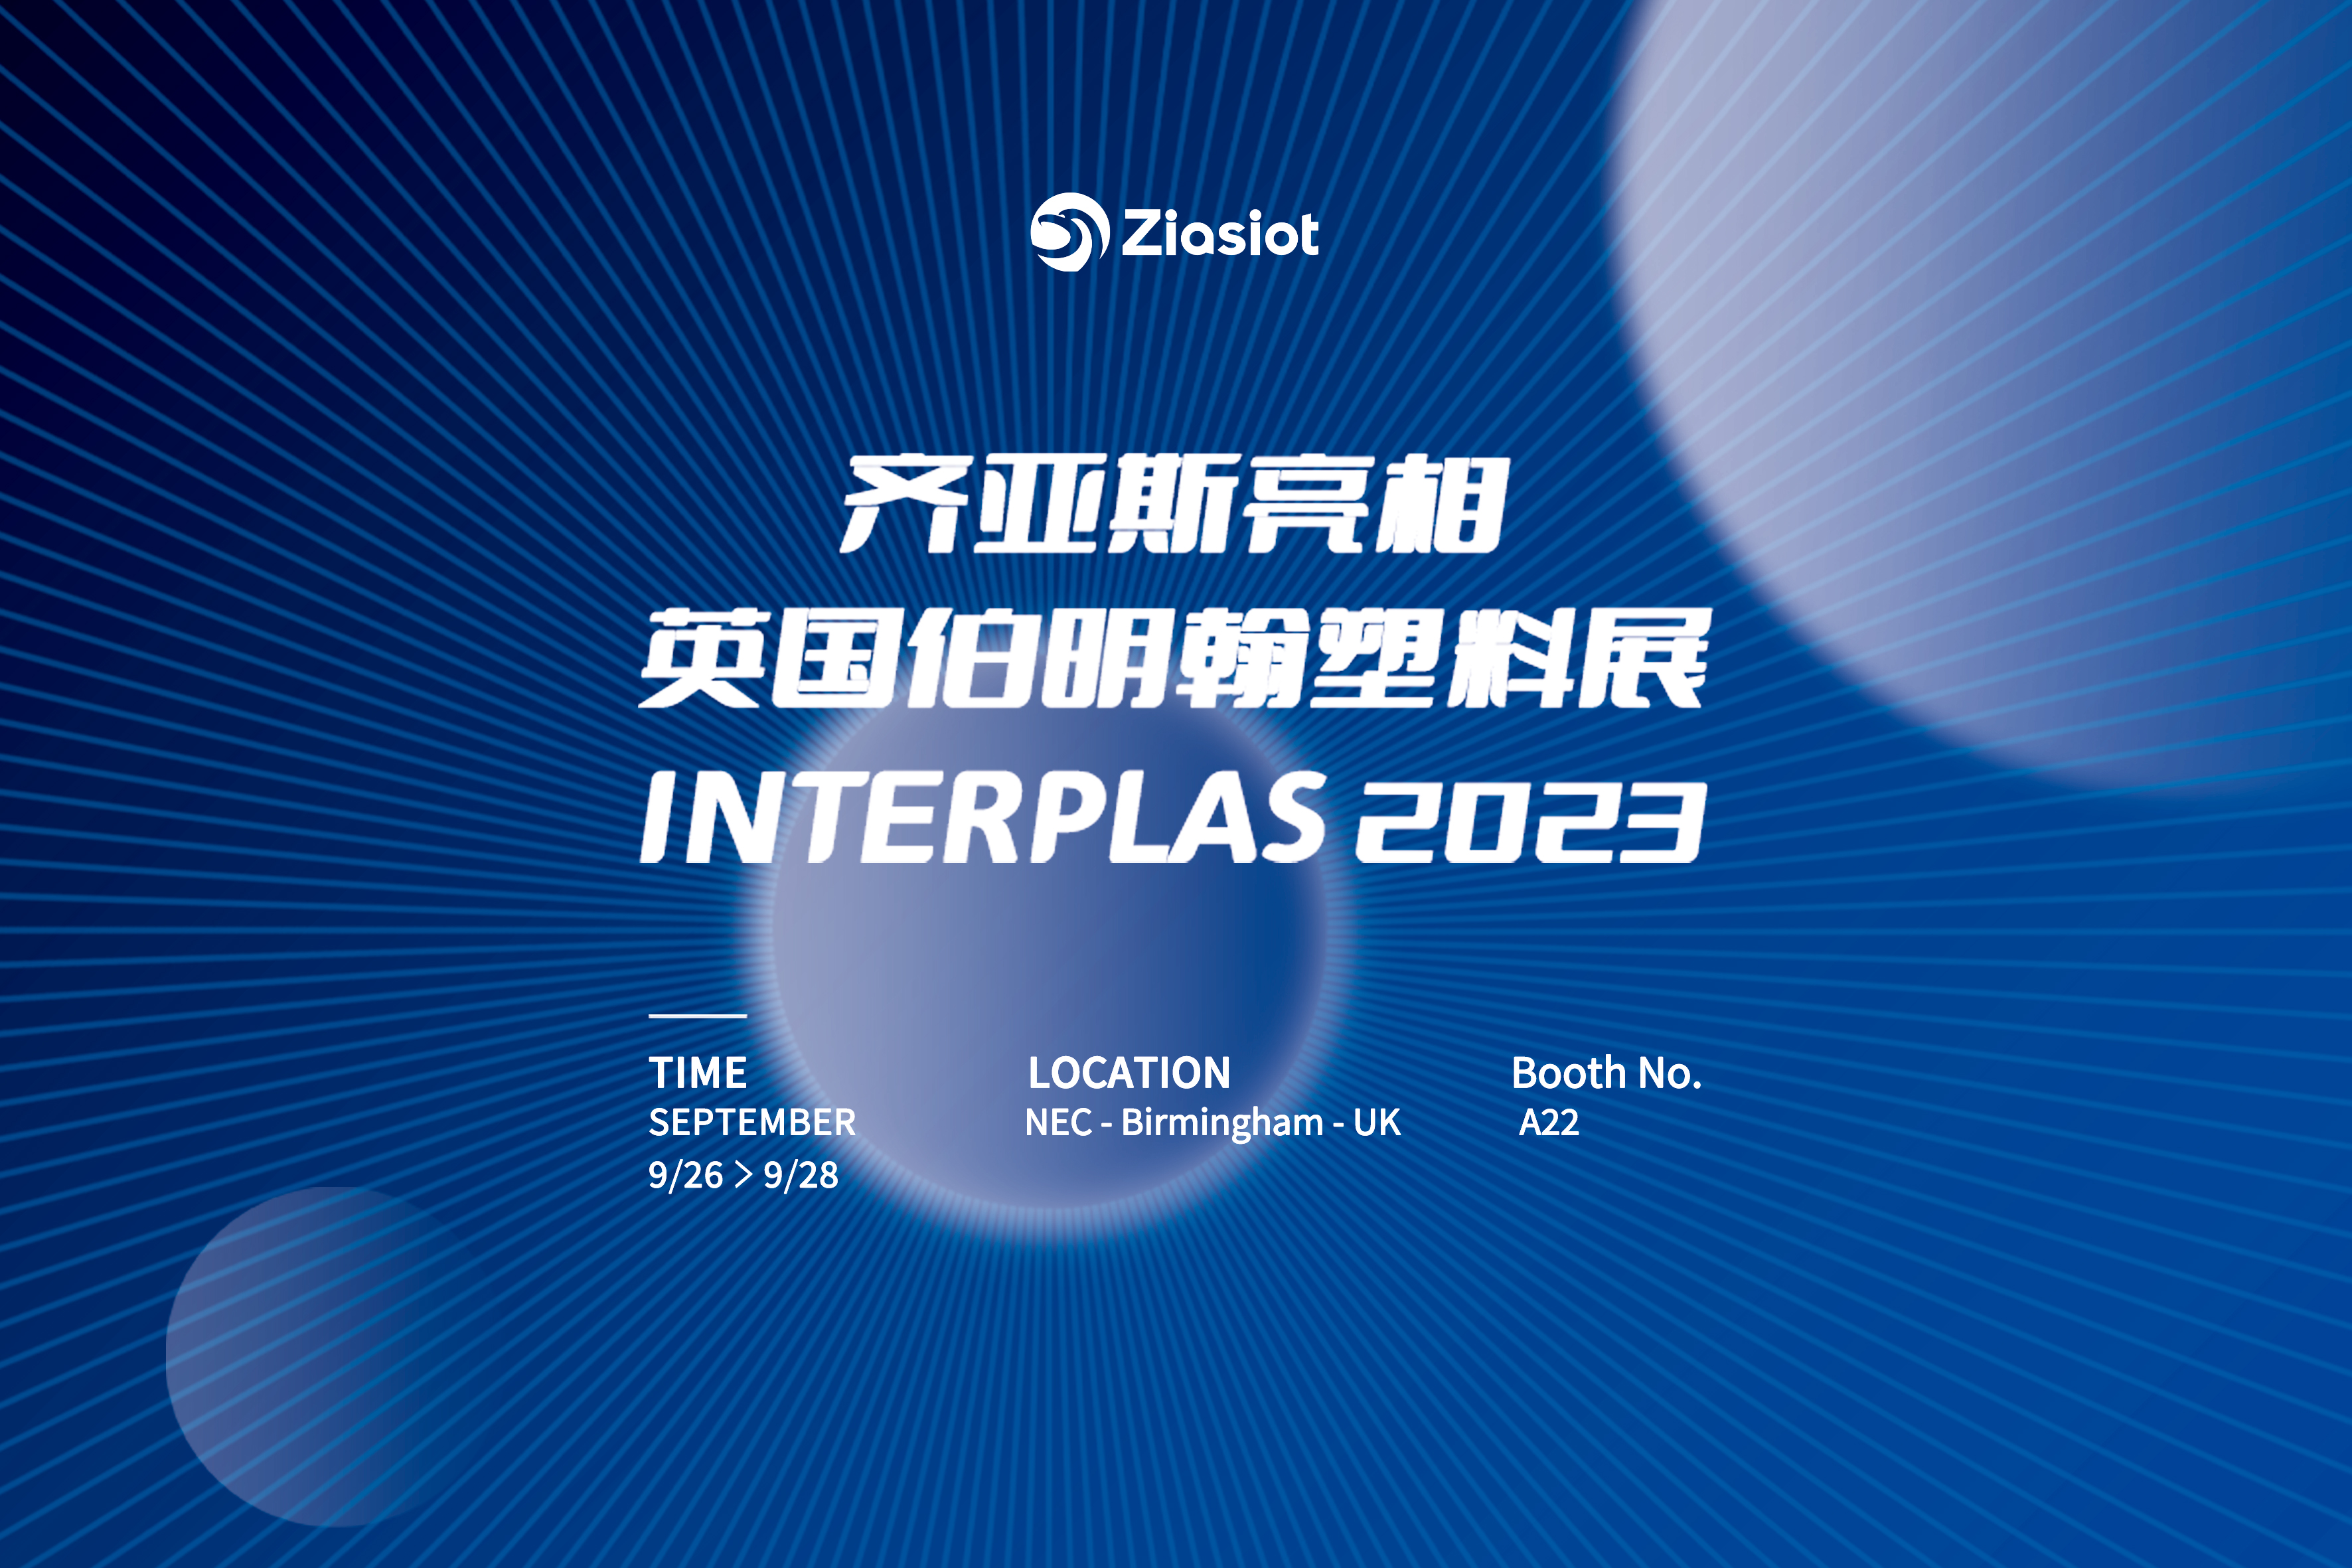 Ziasiot attended INTERPLAS 2023 in the UK